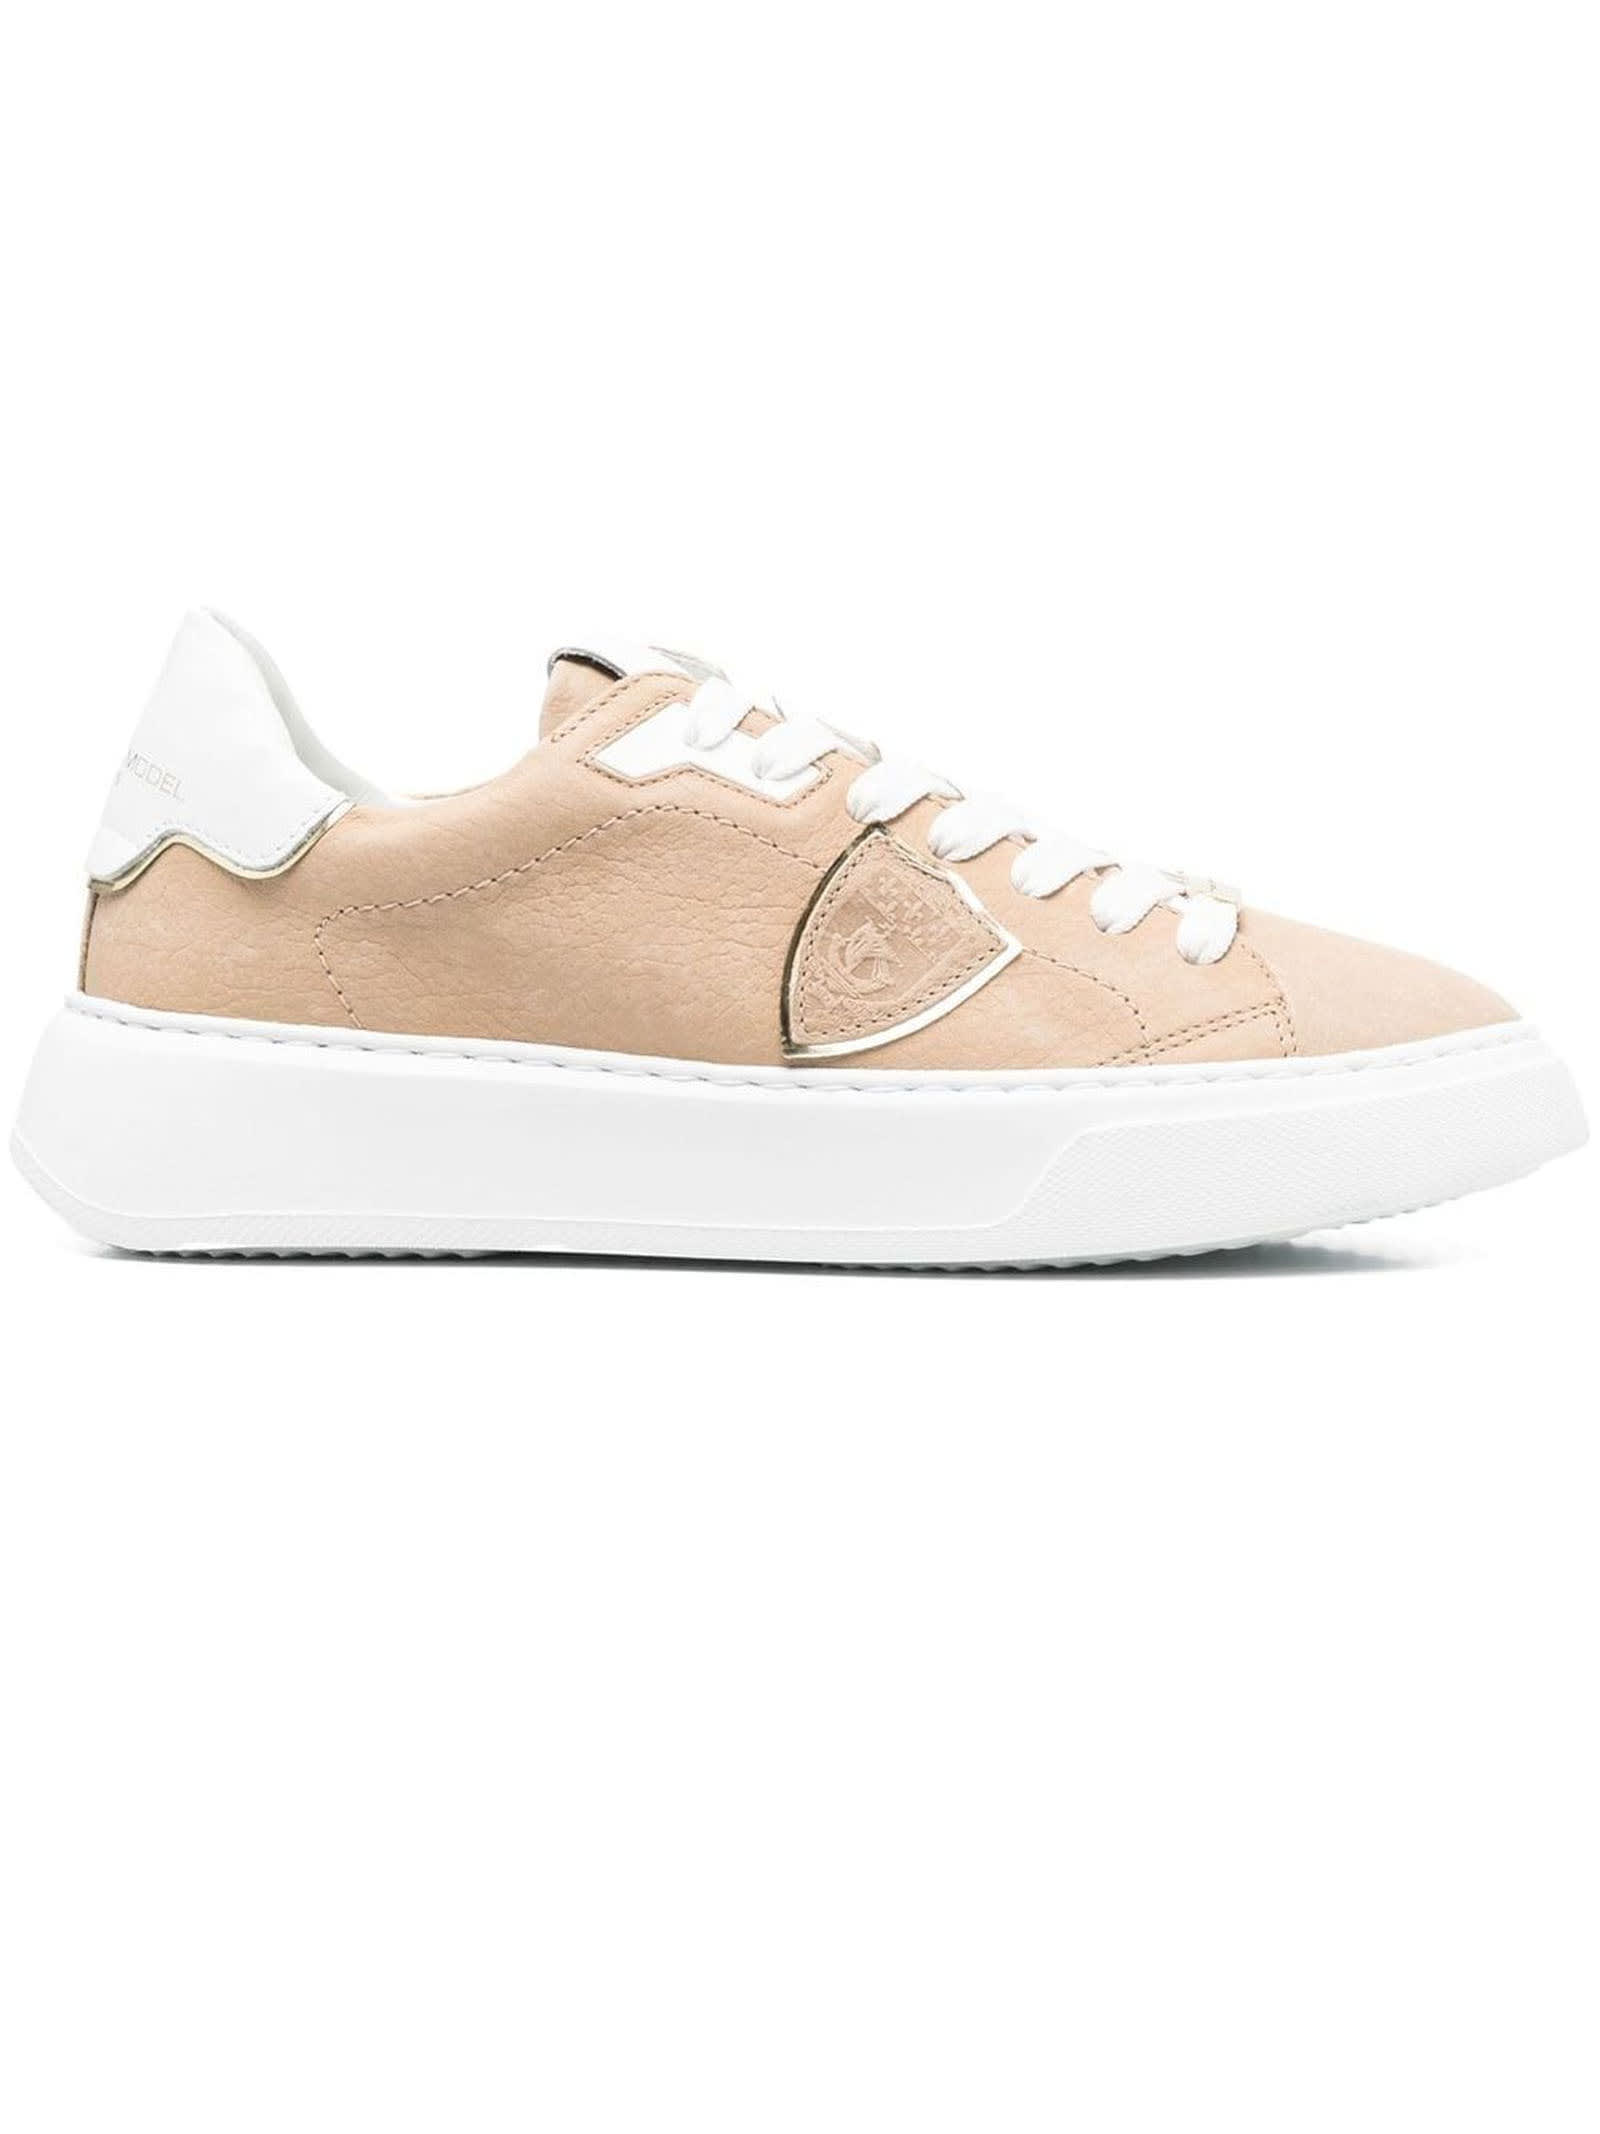 Philippe Model Beige Leather Temple Sneakers